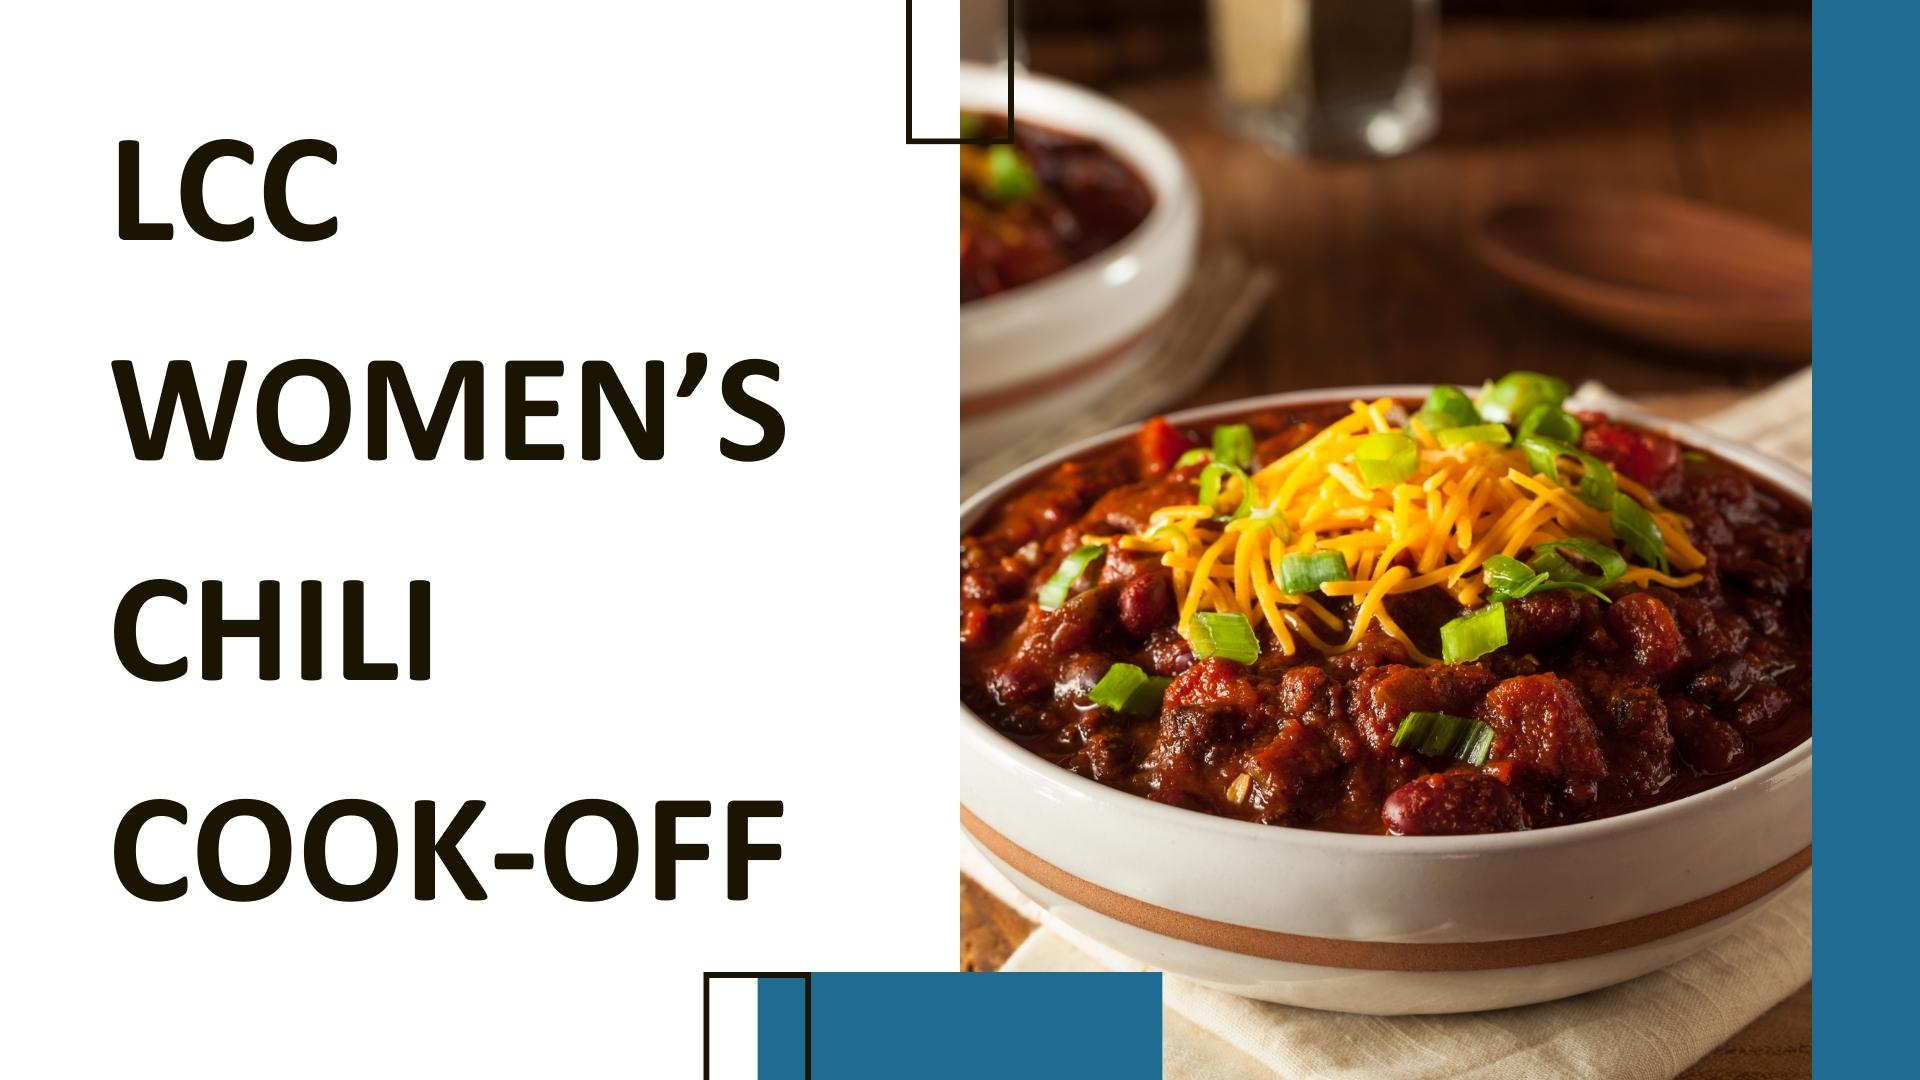 Women's Chili Cook-off General